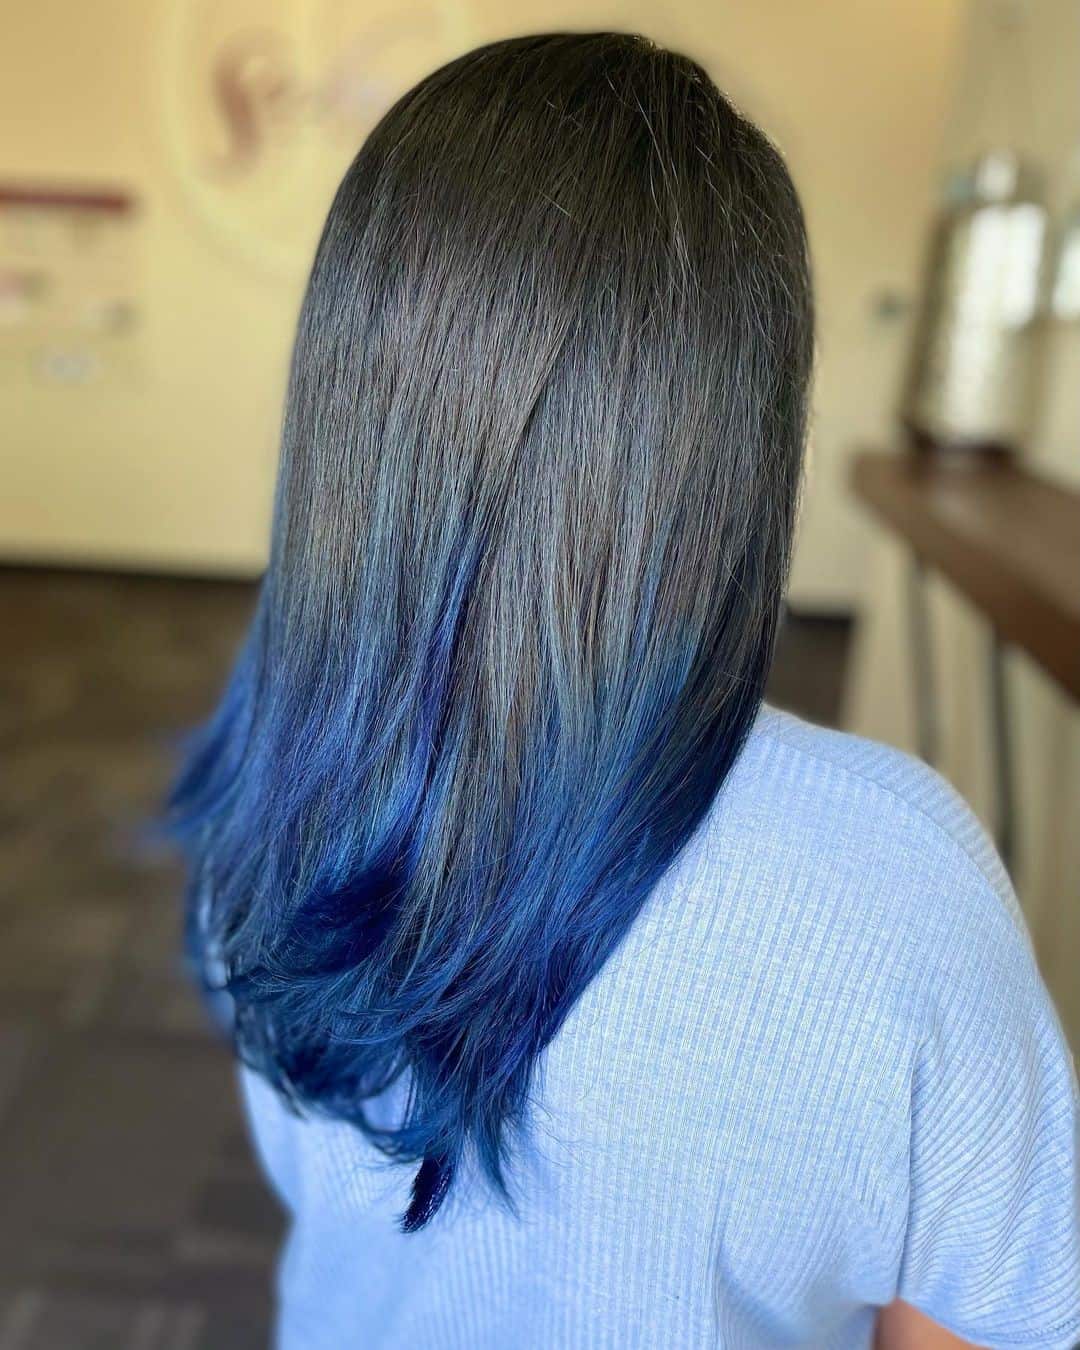 Long Ombre Black And Blue Hair